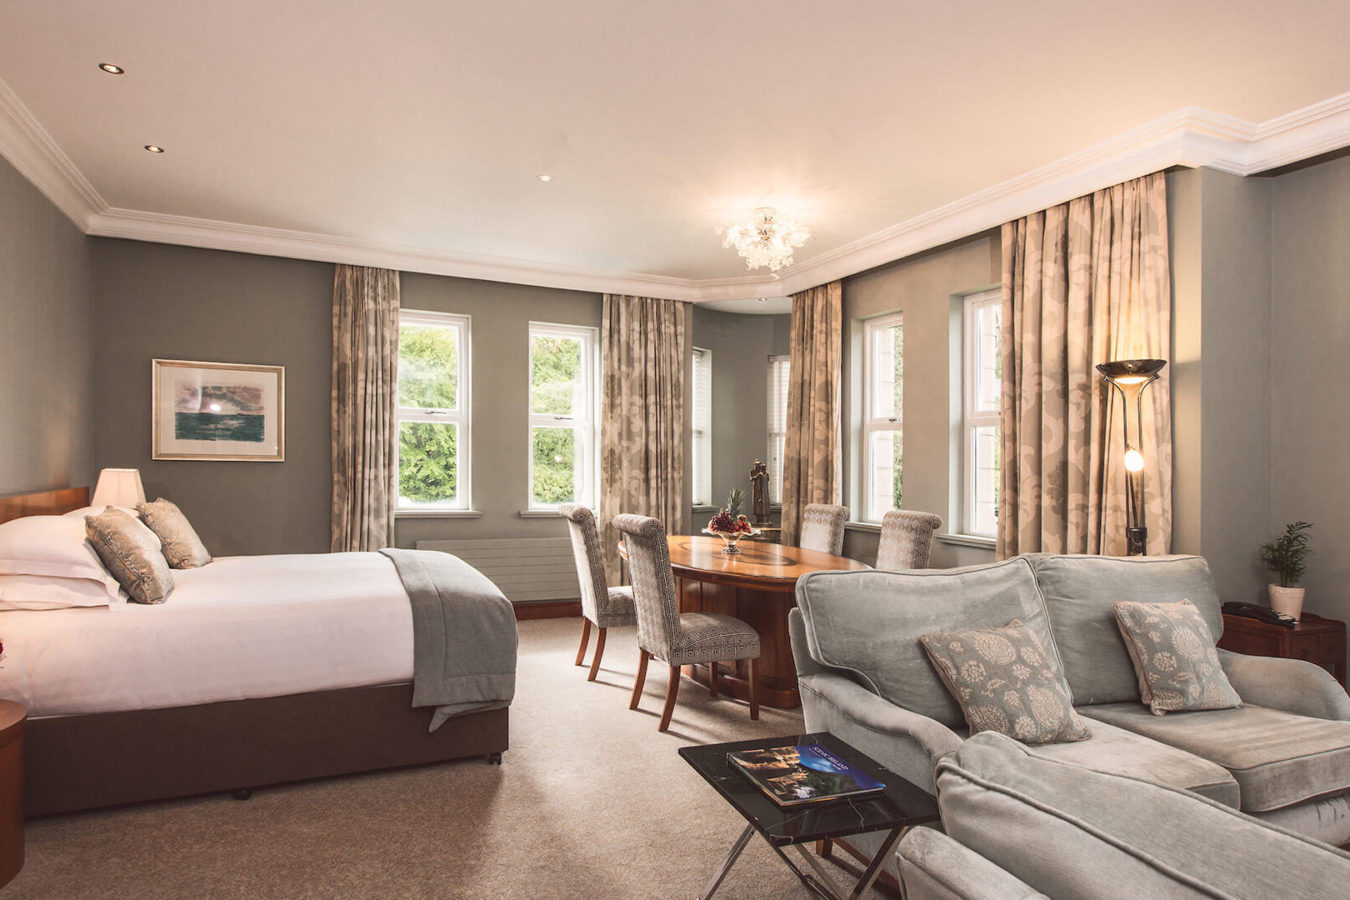 Review - We Check In to the Culloden Estate and Spa